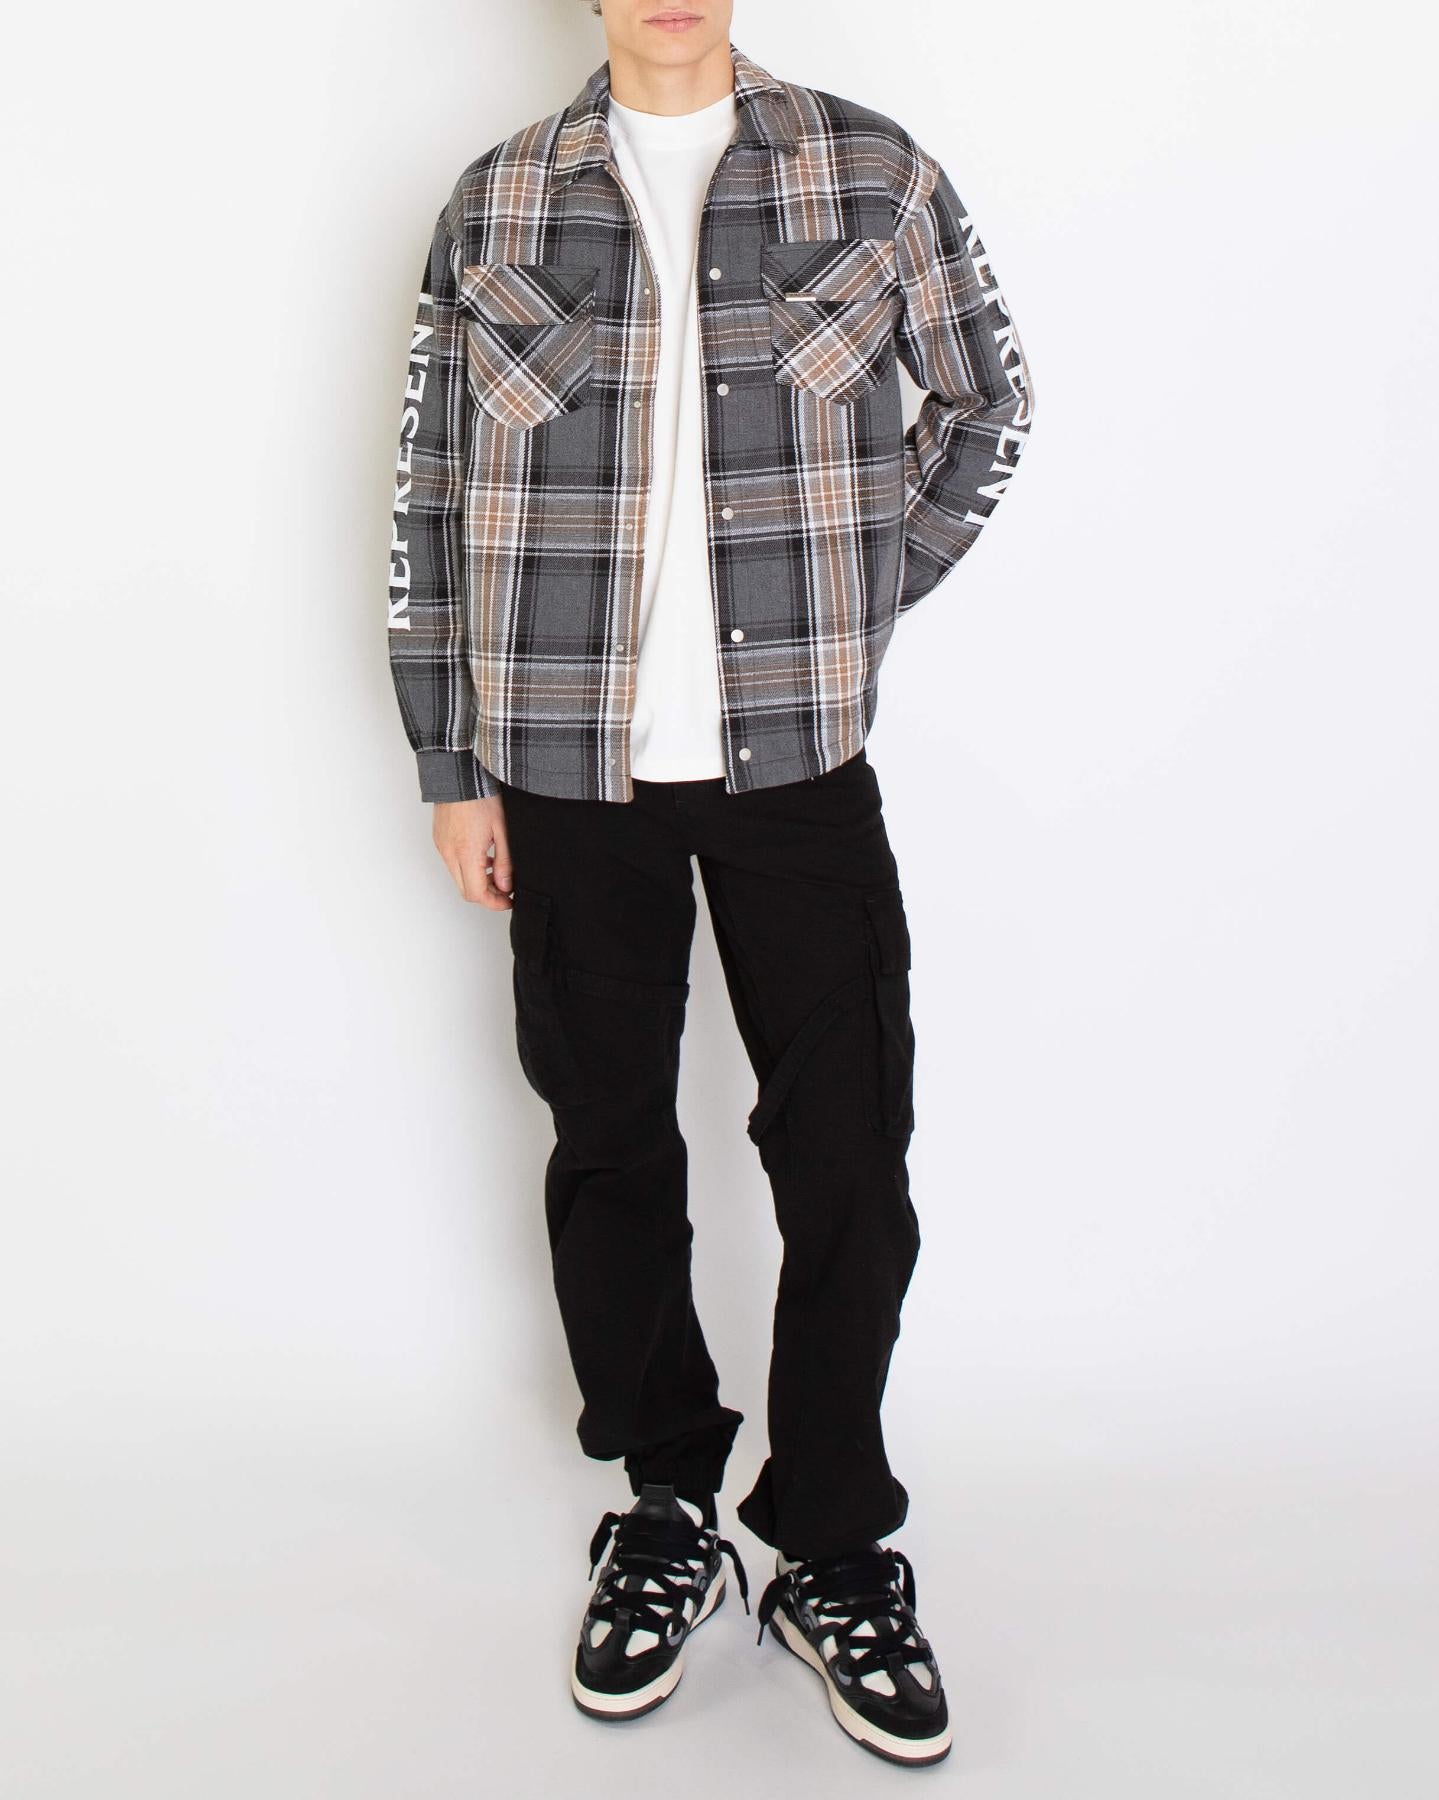 Men Quilted flannel shirt gray